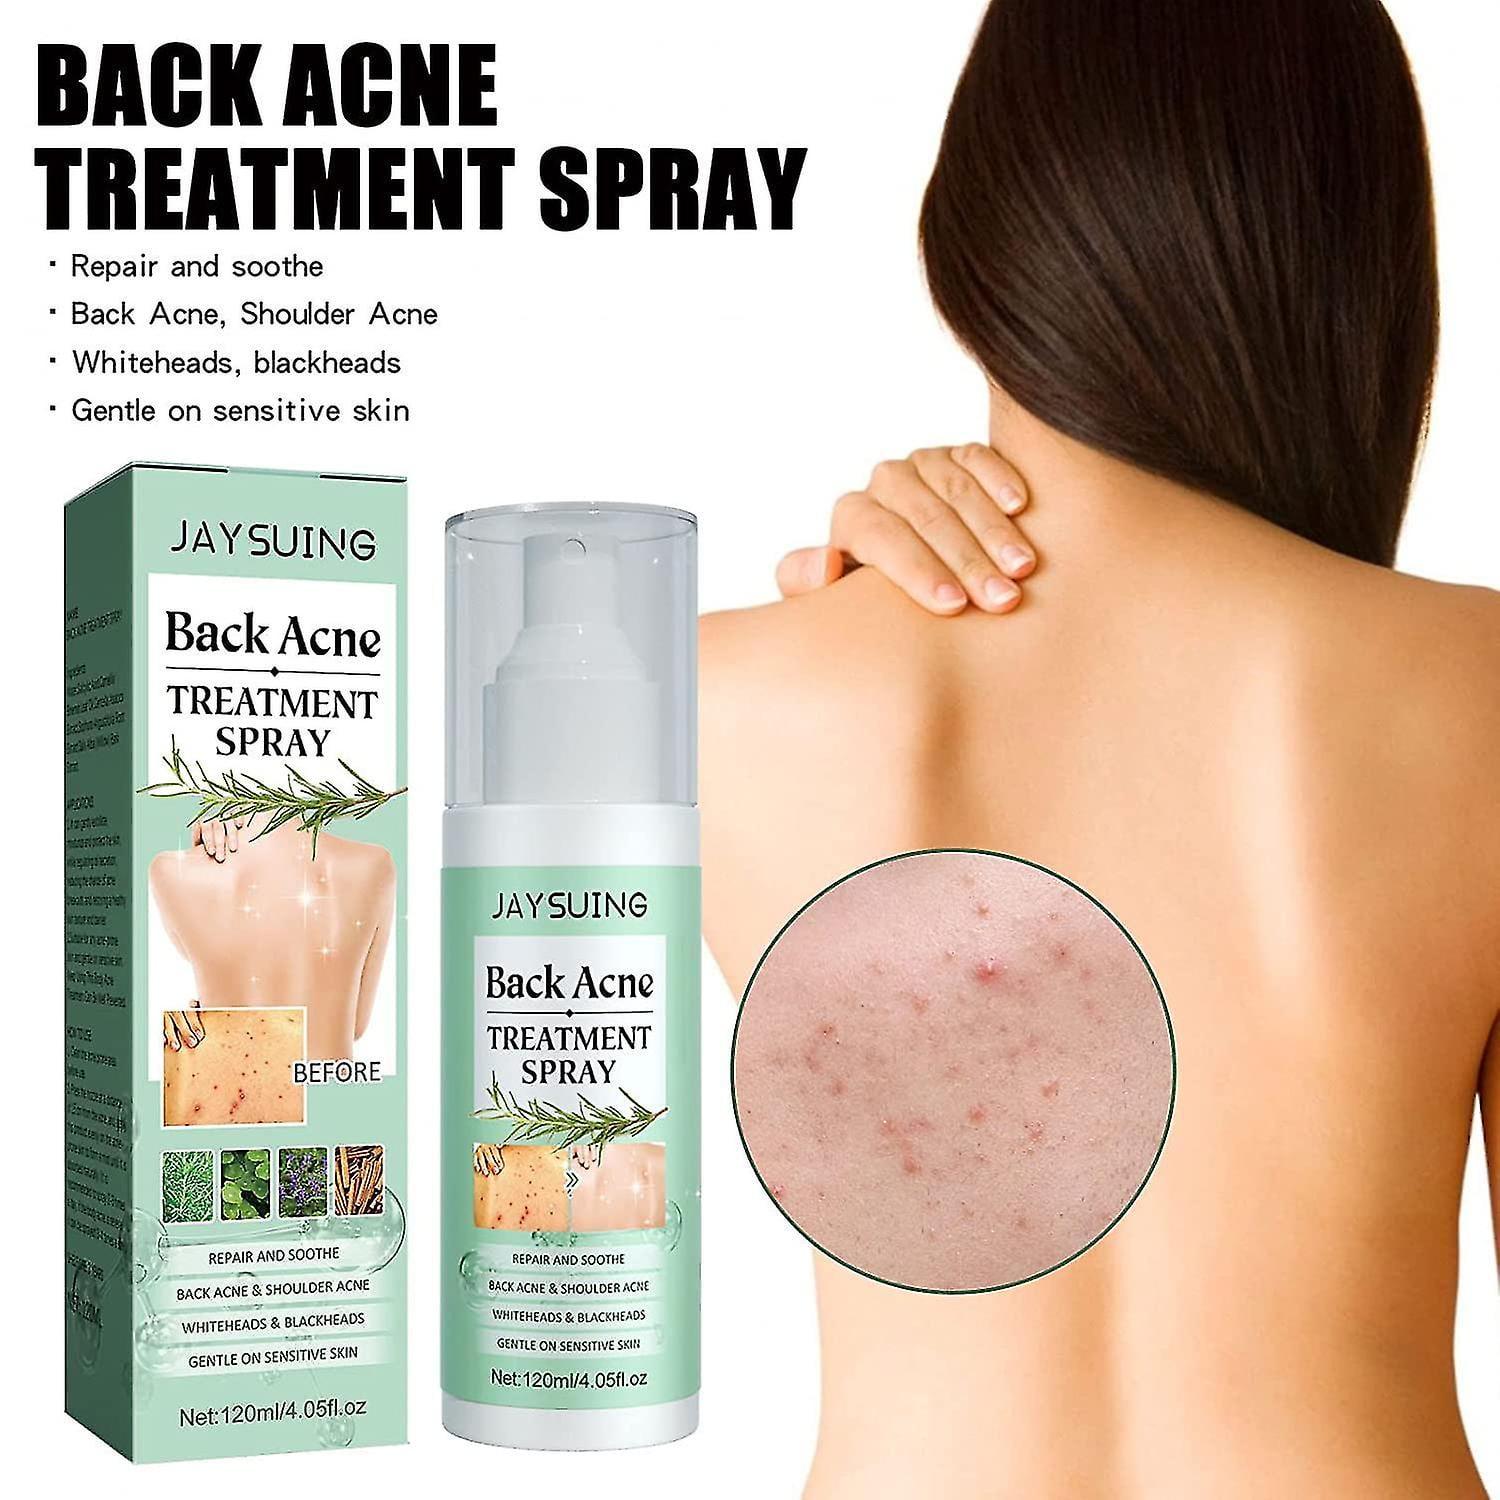  Clean Skin Club Acne Mist, Salicylic Acid Spot Treatment,  Dramatic Improving Results, The Only Spray that Combats & Prevents for  Face, Body and Back, Breakout Fighting Dots, Dark Spots, Pimples 